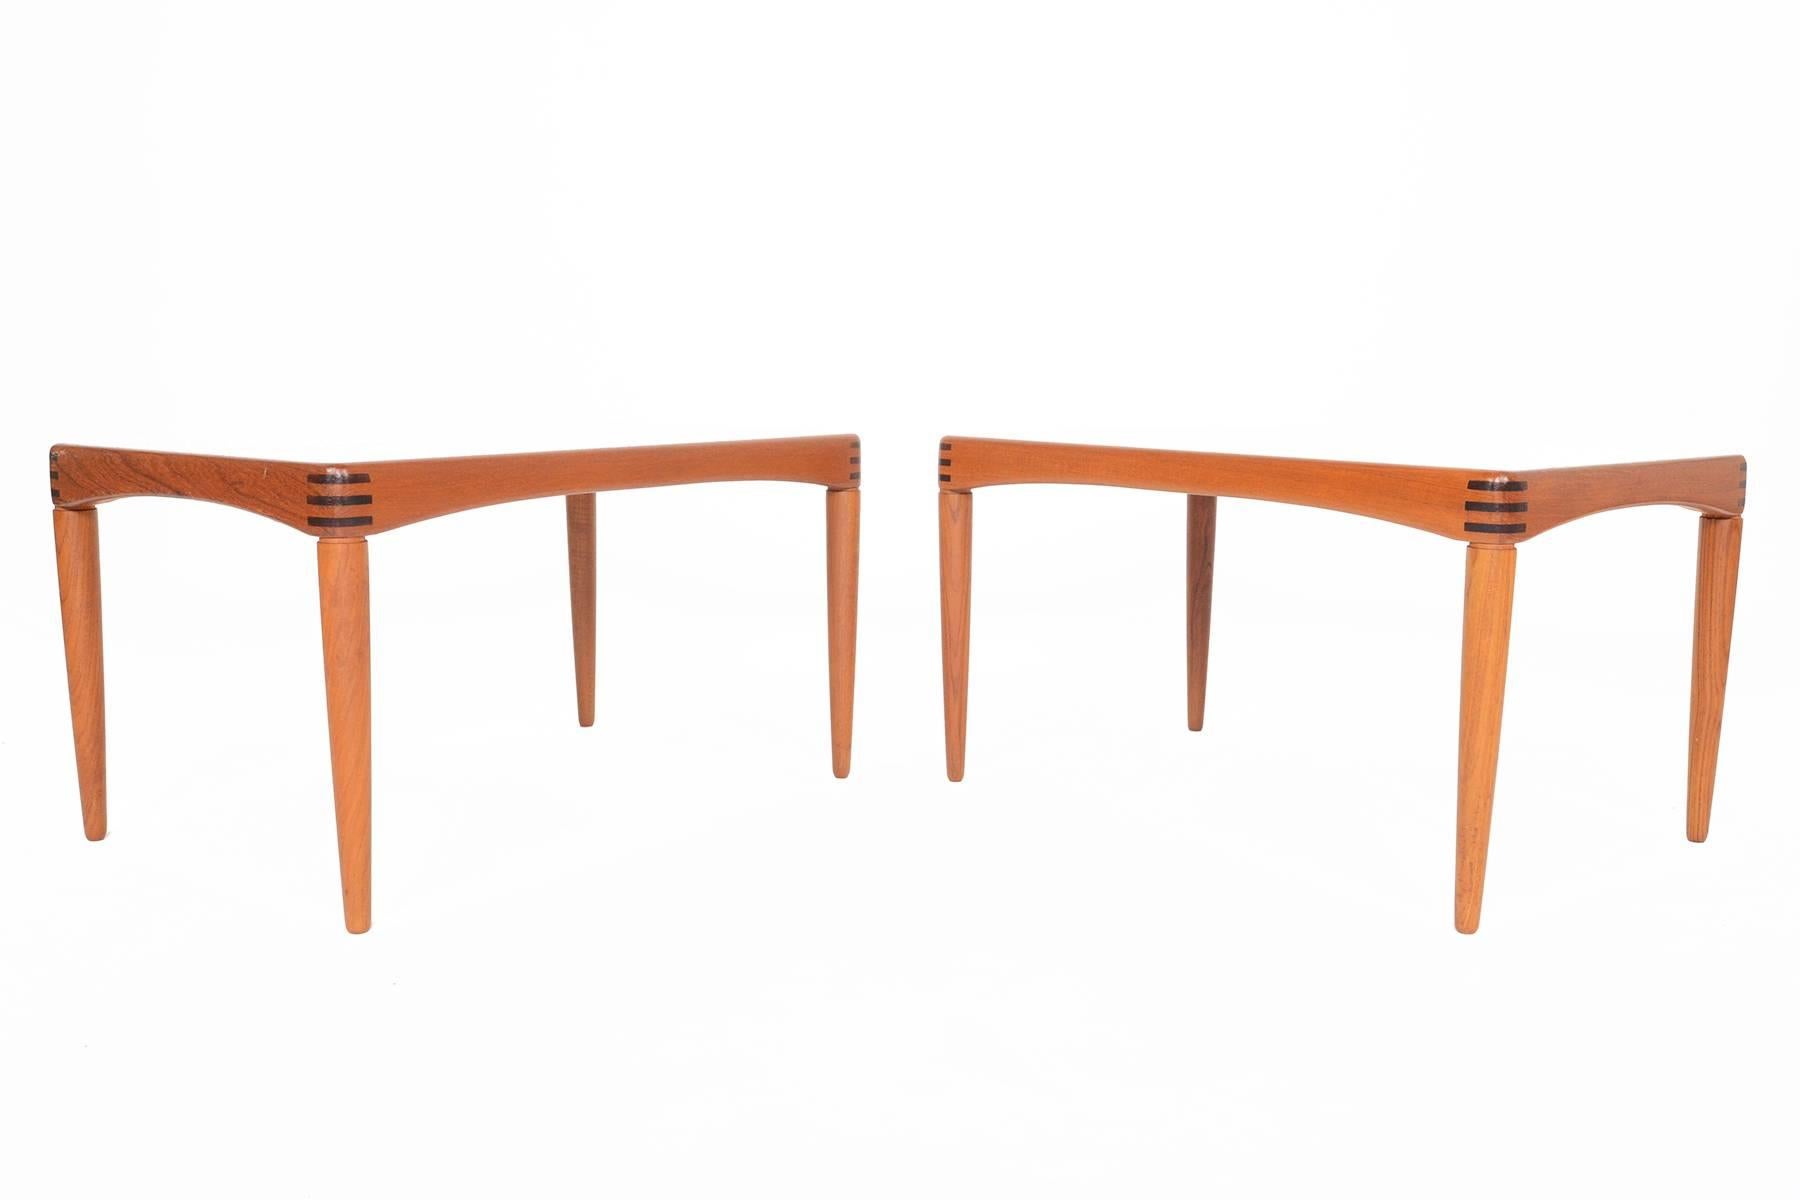 This stunning pair of Danish modern Mid-Century side tables in teak were designed by H.W. Klein for Bramin in the 1960s. Beautiful banding is accented with Brazilian rosewood inlays around the corners. Stands on tapered spindle legs. In excellent